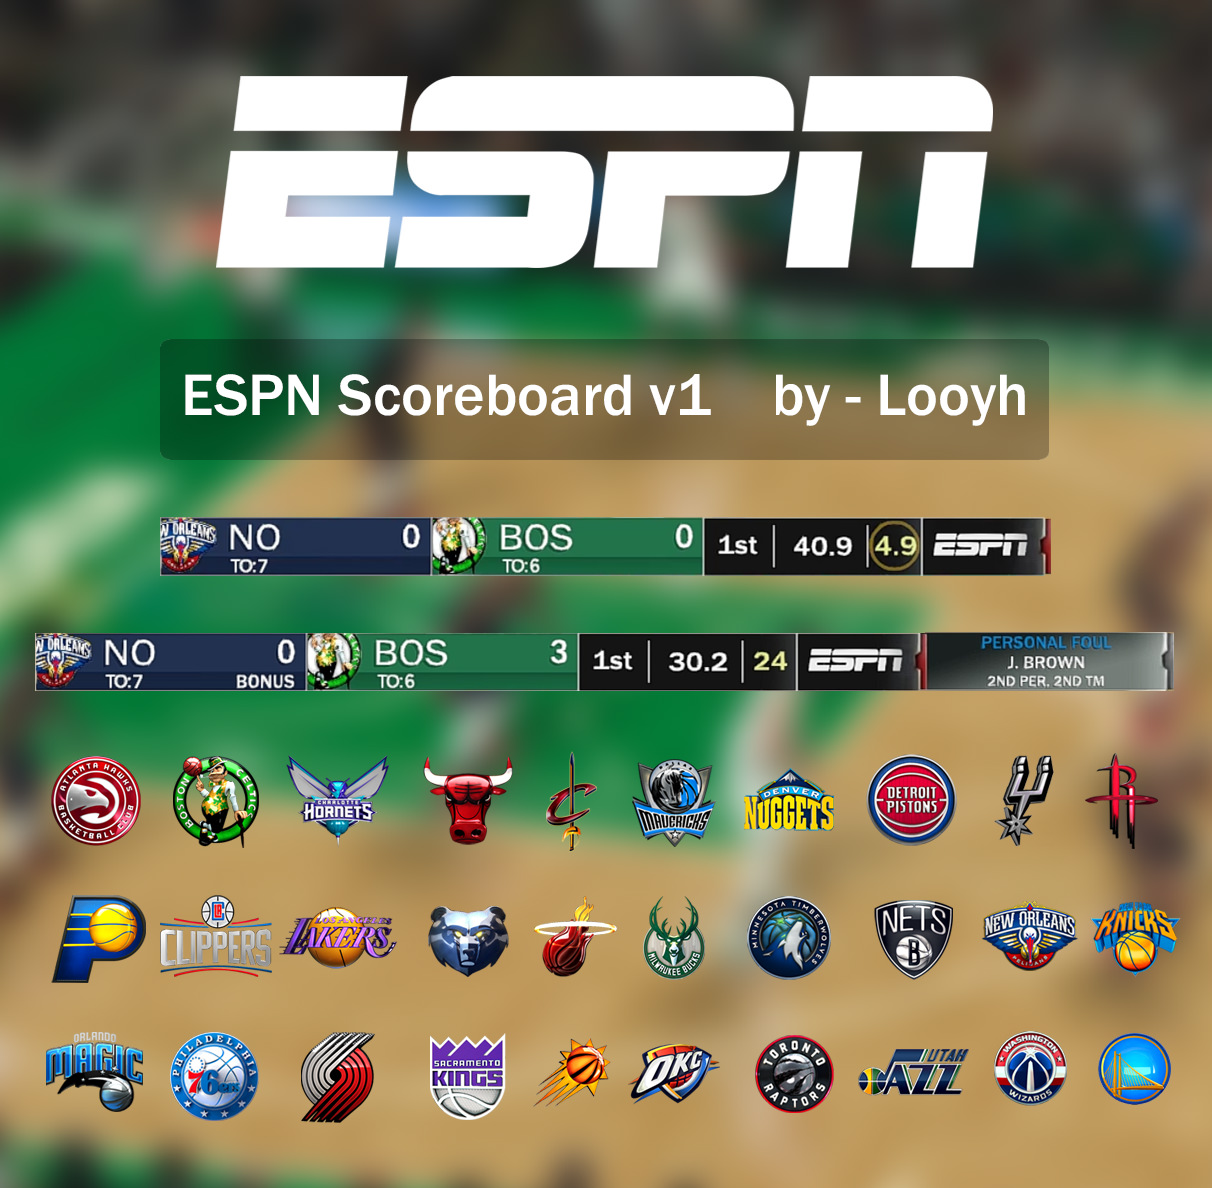 Shuajota Your Site For Nba 2k Mods Nba 2k18 Espn Scoreboard With 3d Logos By Looyh Released